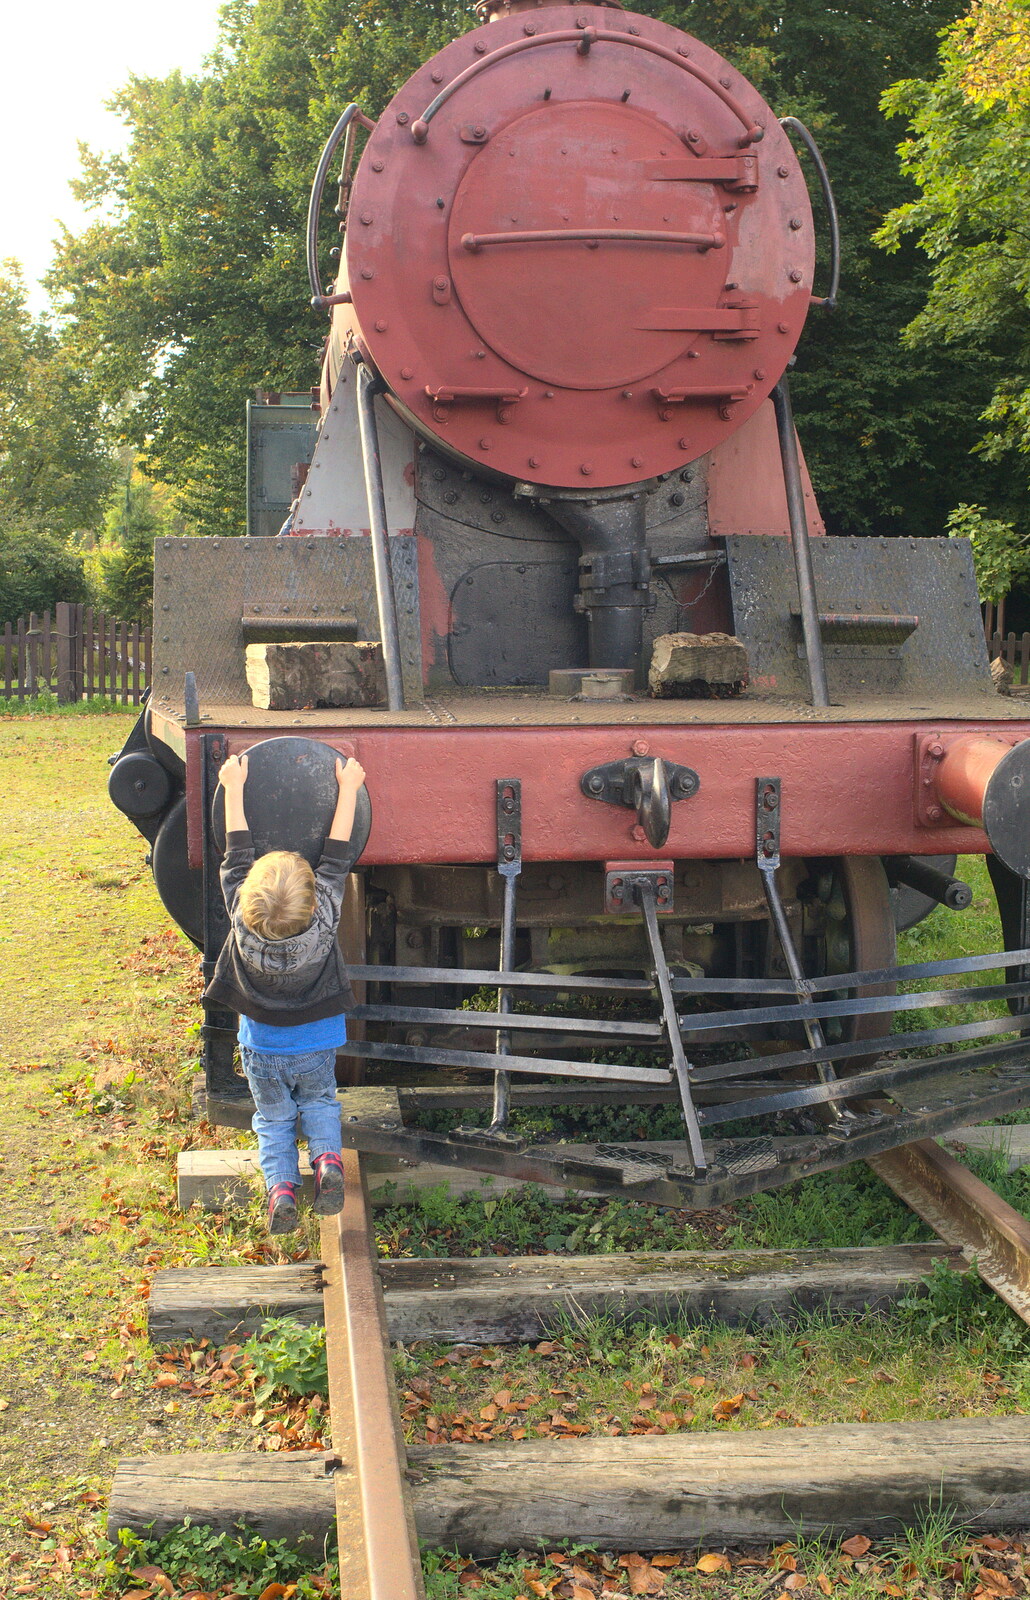 Fred hangs off the buffer of a locomotive from Diss Miscellany, and a Few Hours at Bressingham, Diss and Bressingham, Norfolk - 13th October 2012